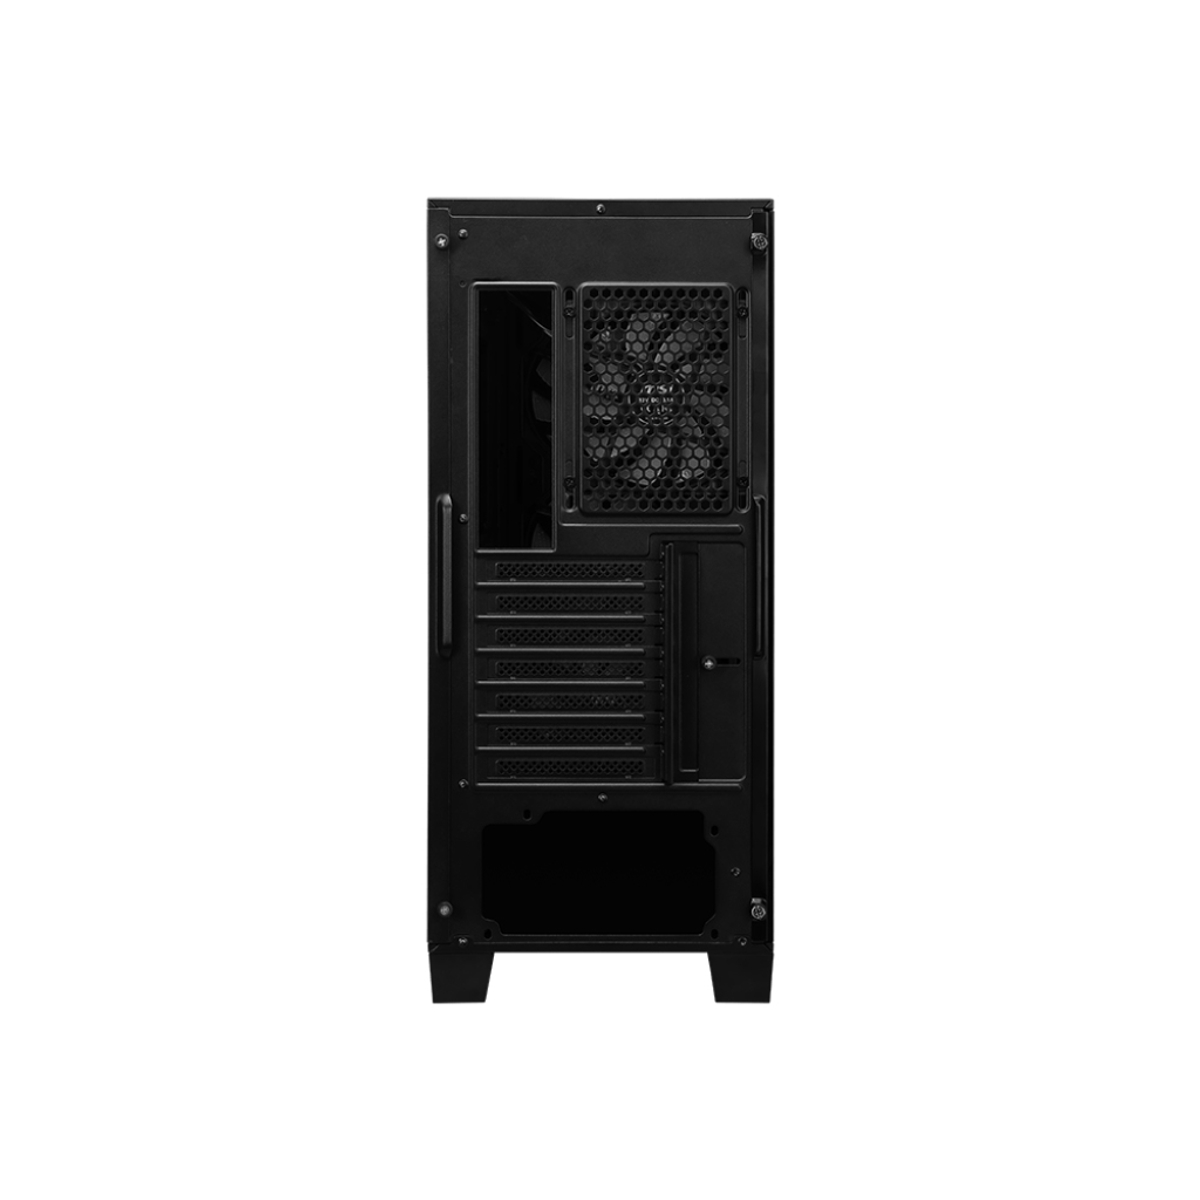 CASE MAG FORGE 120A AIRFLOW ATX